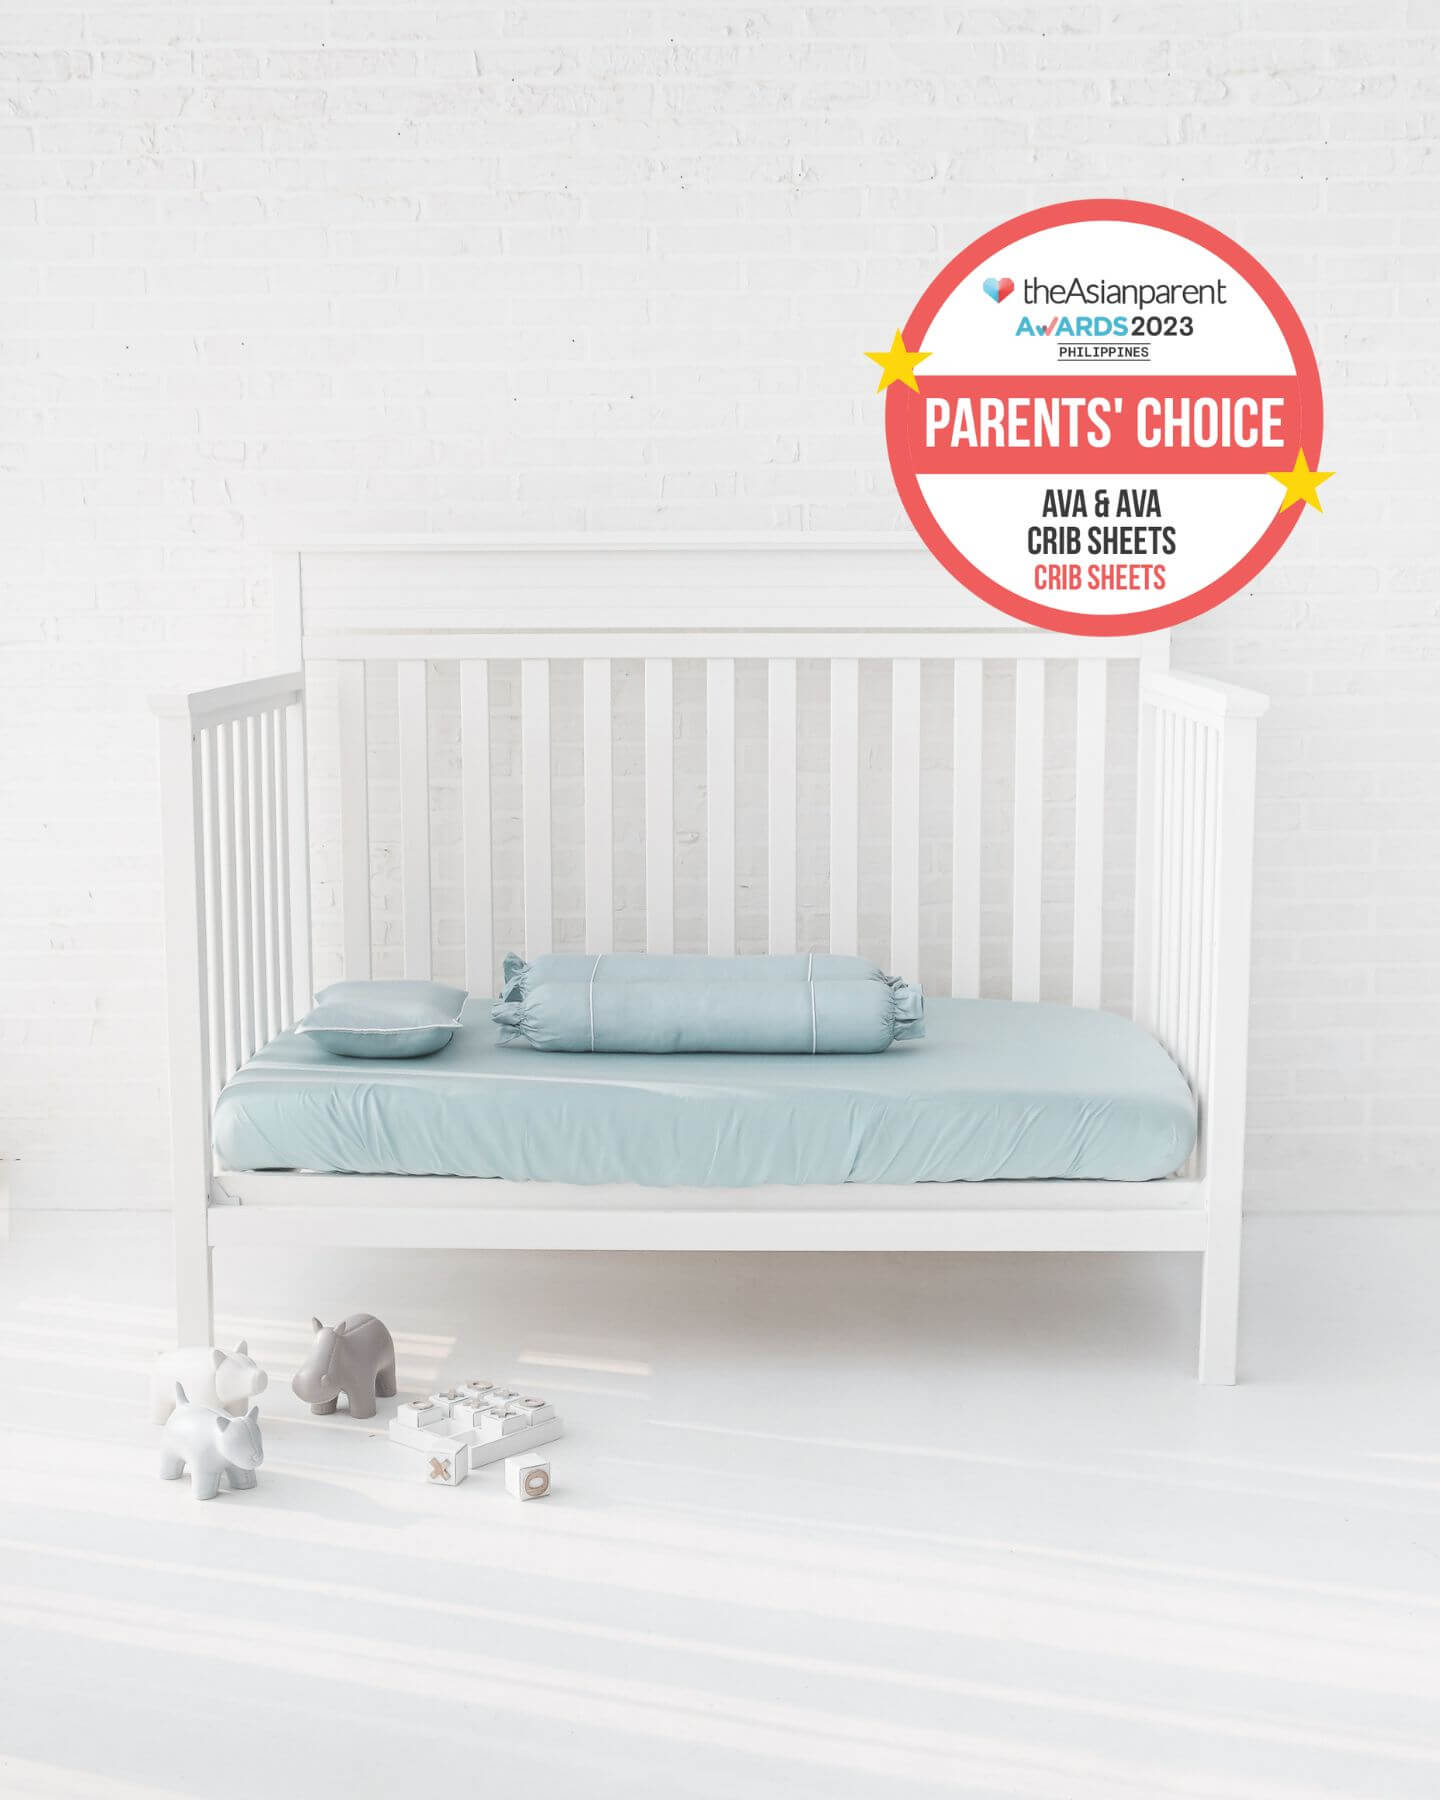 ava and ava ph organic bamboo lyocell baby bedding - crib fitted sheet, pillowcase, 2 bolstercases in silver lining (blue with white piping). breathable soft. theasianparent awards philippines best crib sheets